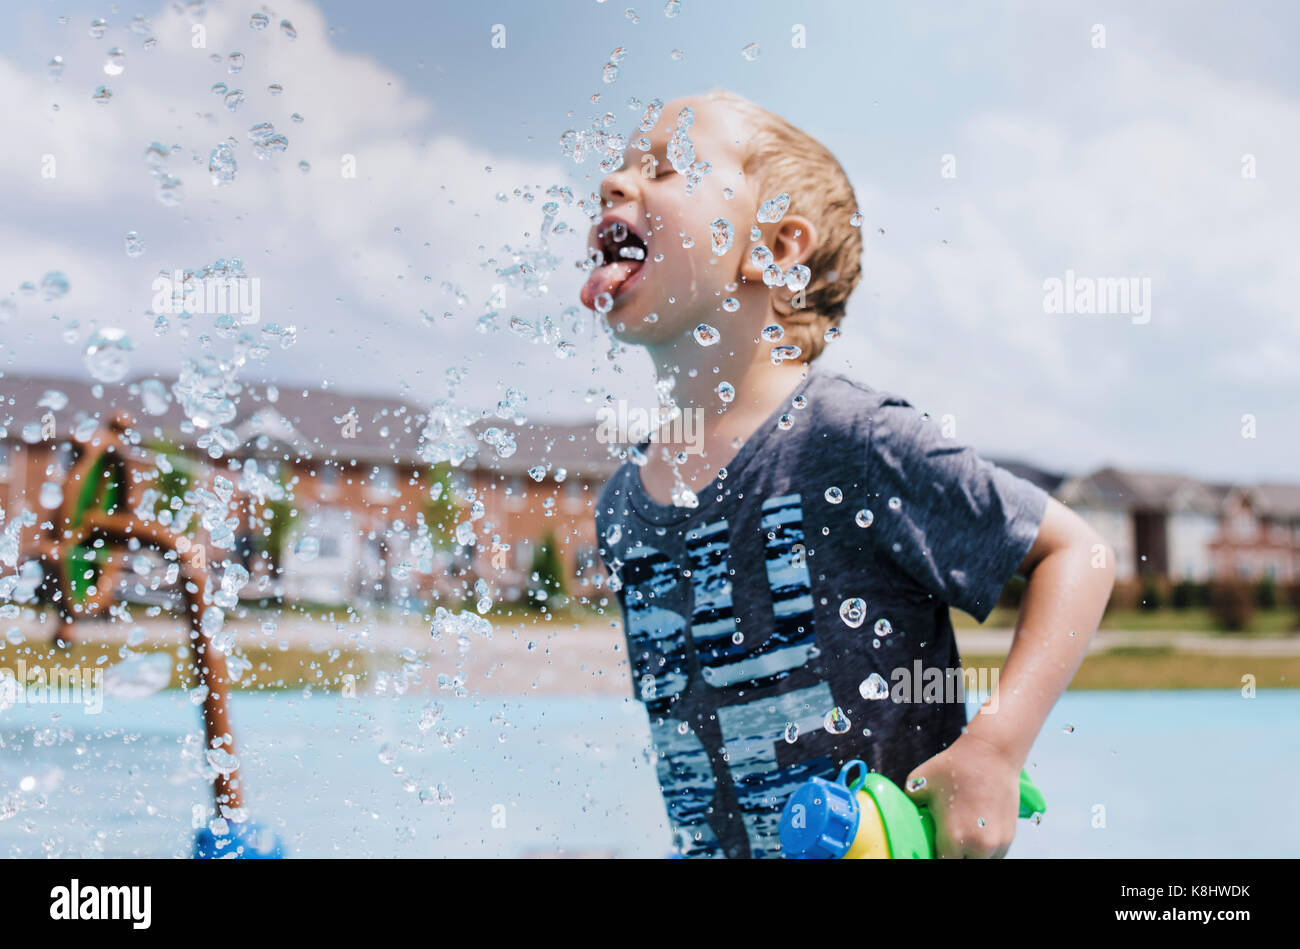 Playful boy sticking out tongue while standing spraying water Stock Photo